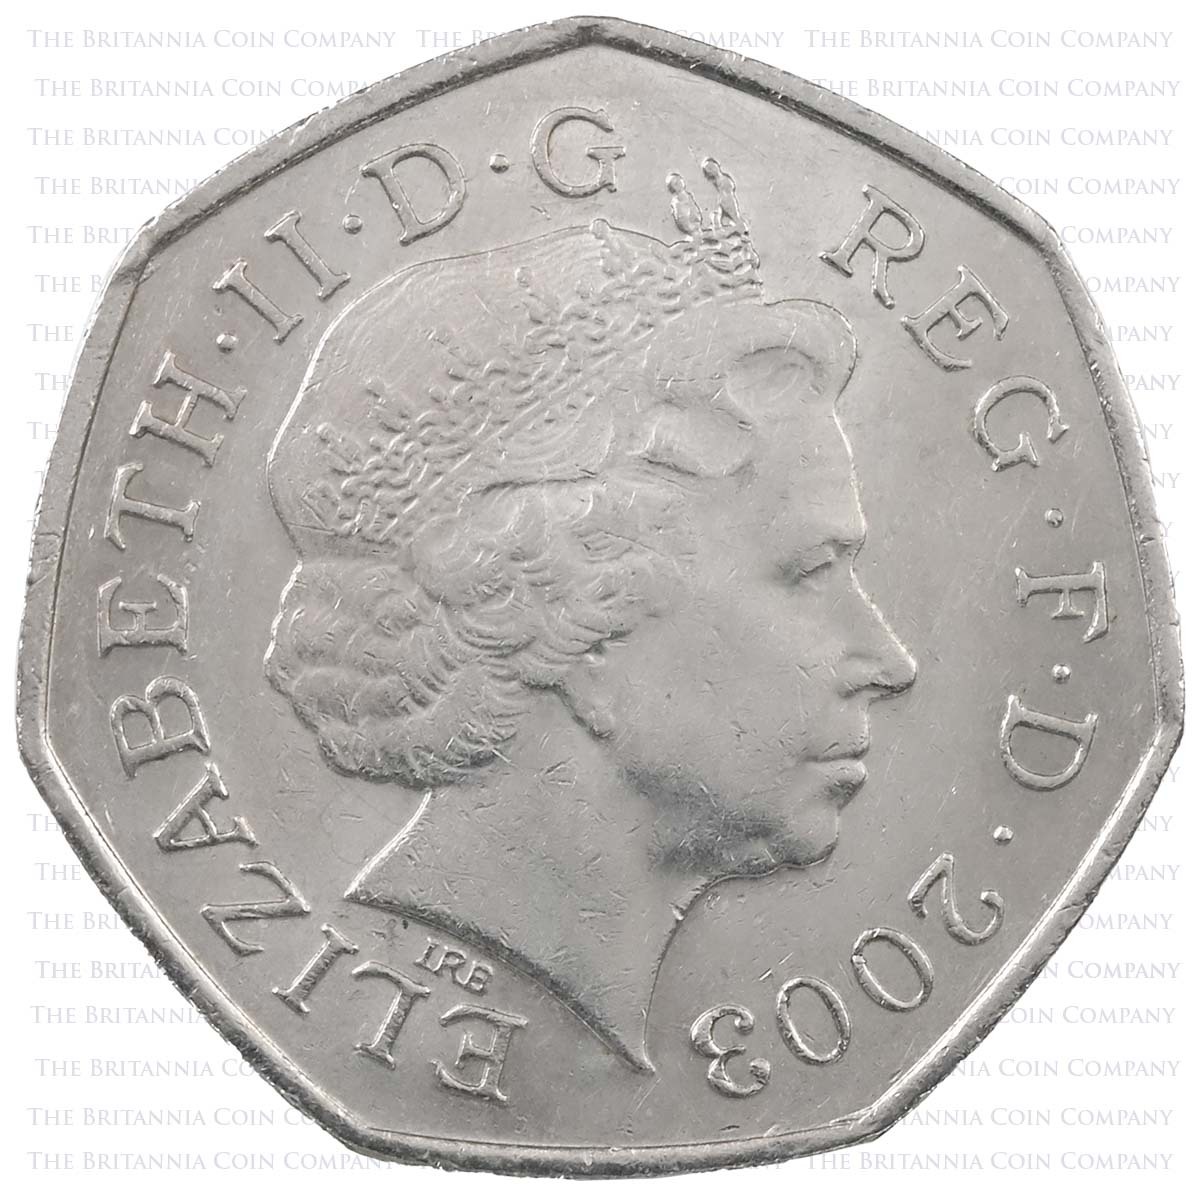 2003 Suffragettes Women's Social And Political Union Votes For Women Circulated Fifty Pence Coin Obverse